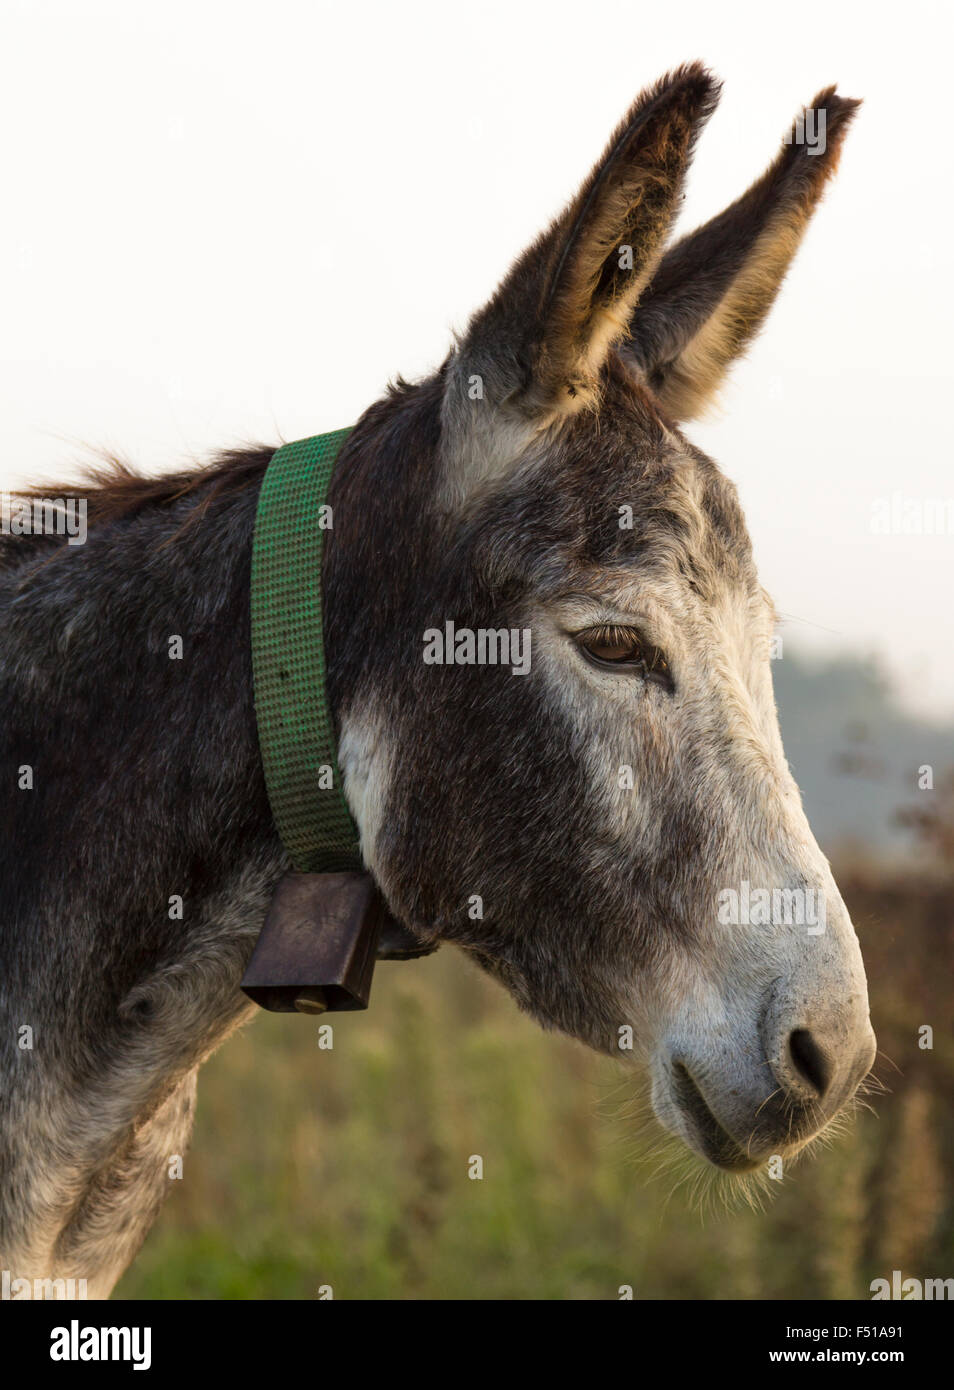 donkey with bell Stock Photo